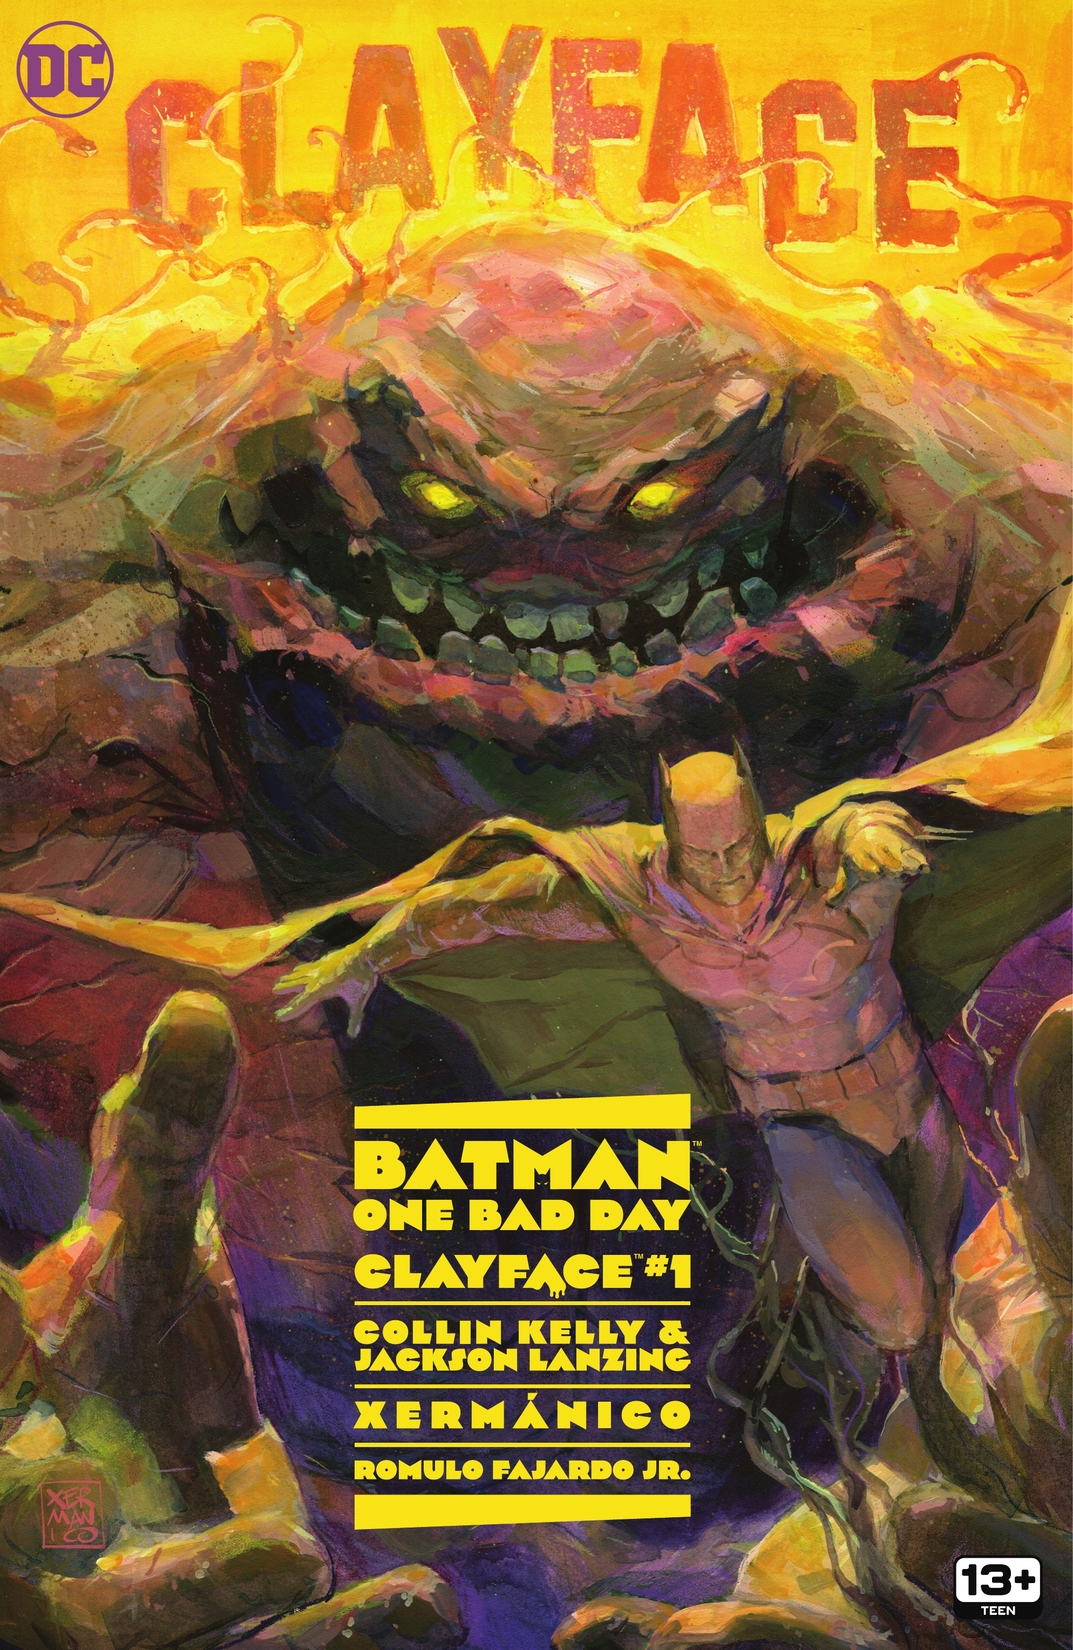 Batman - One Bad Day: Clayface #1 preview images